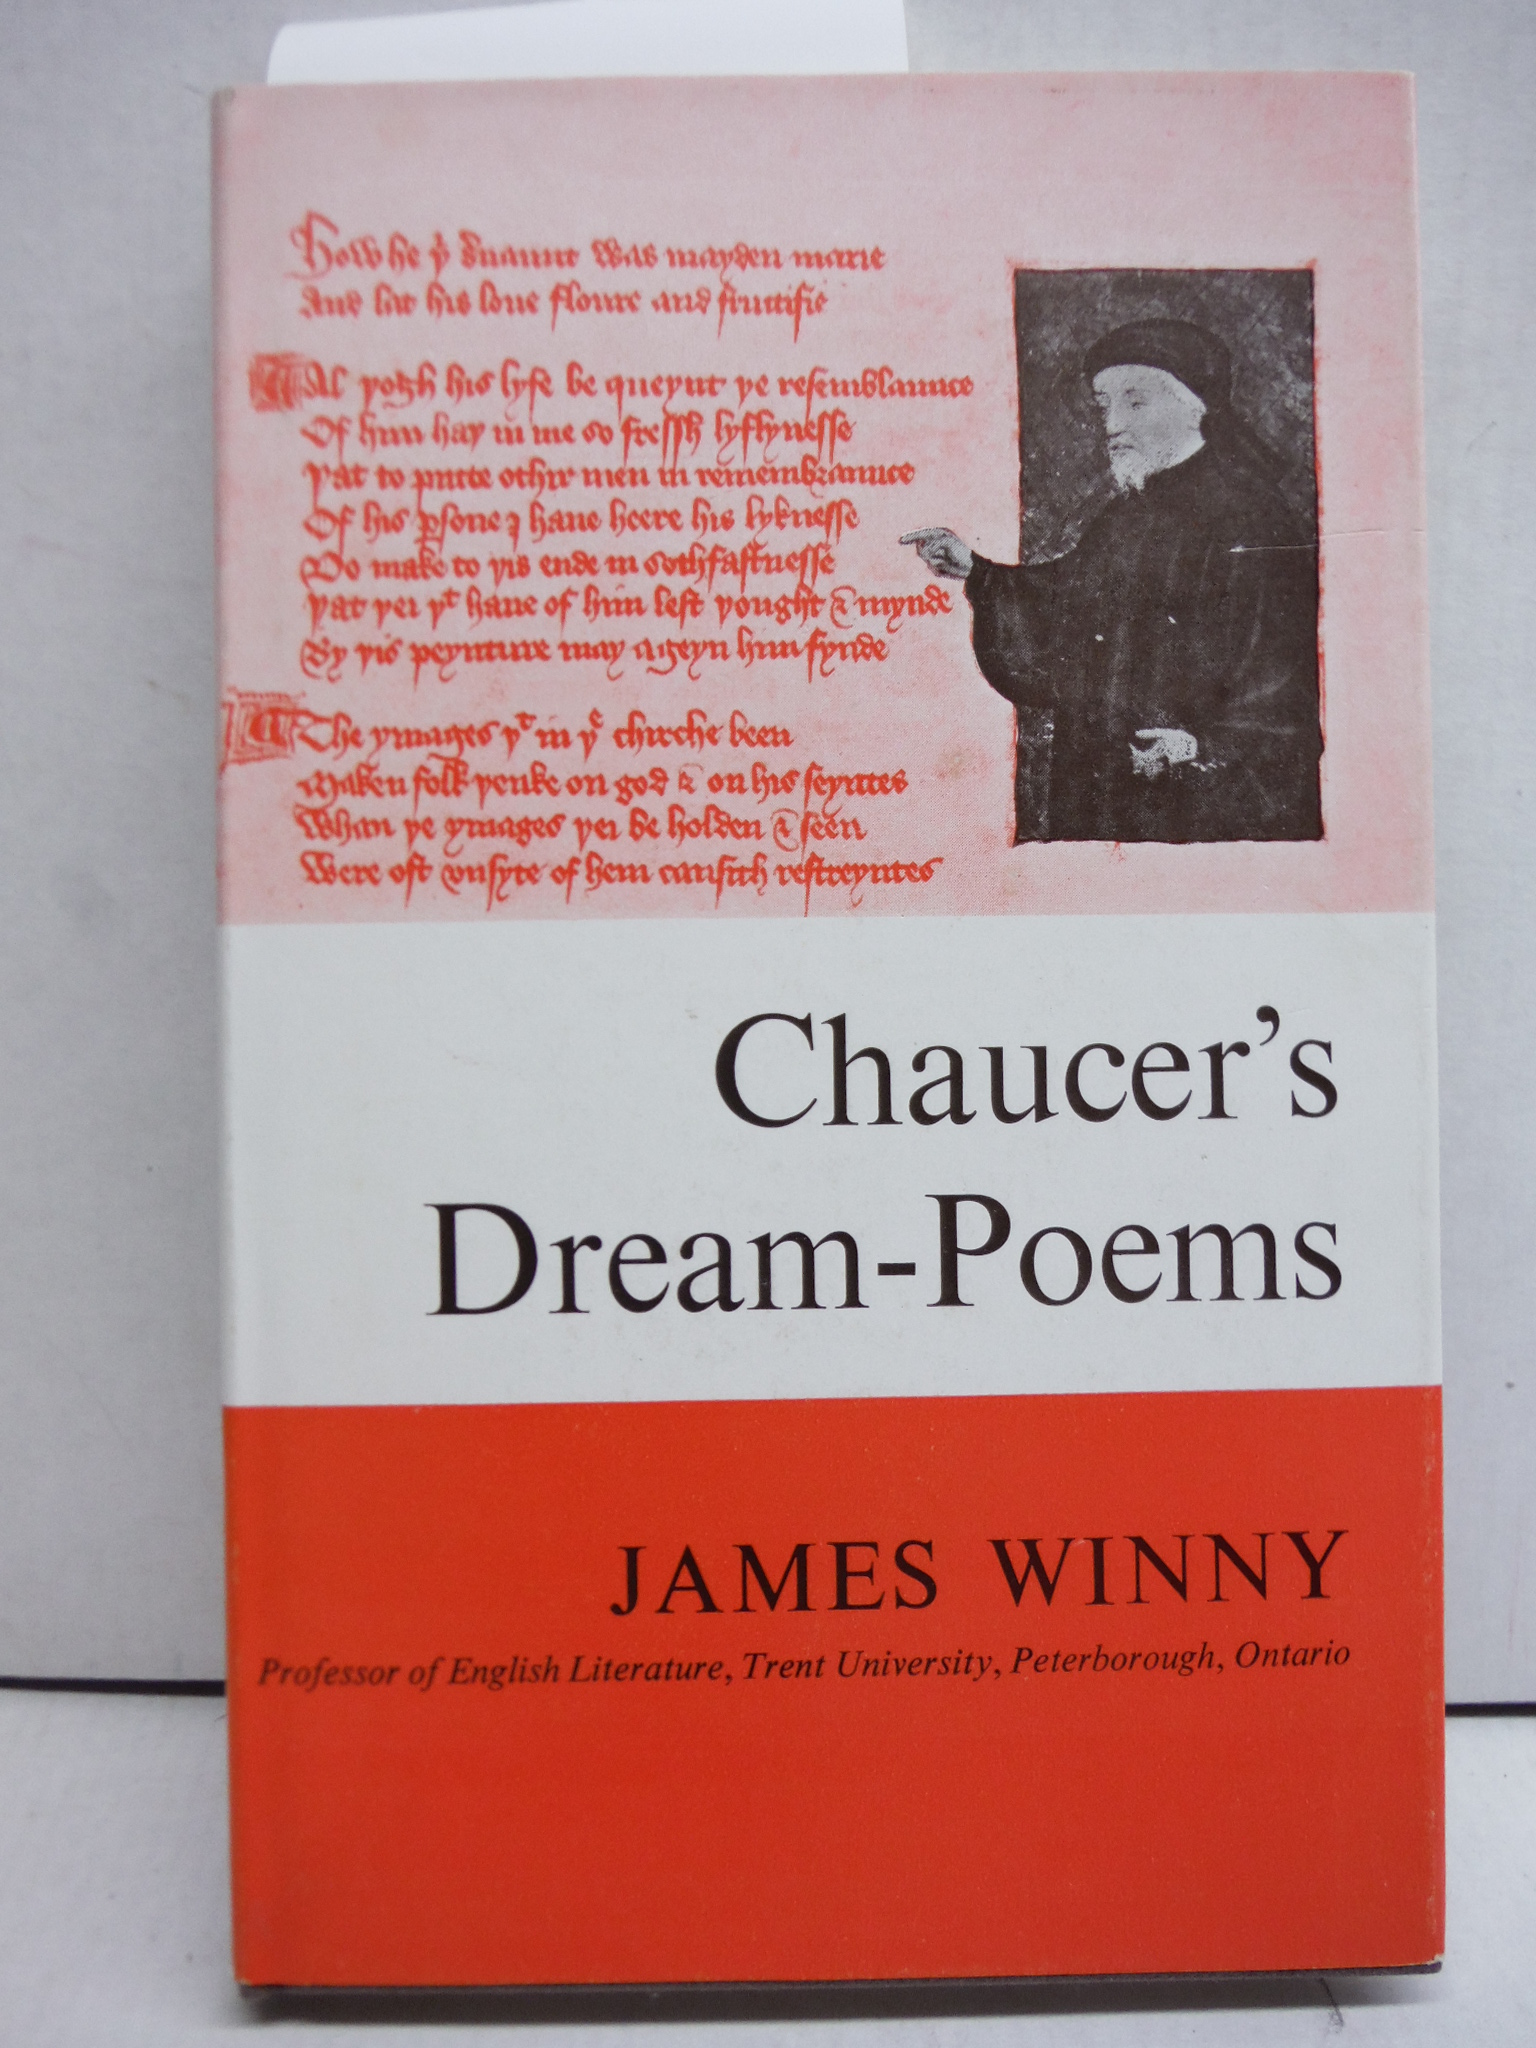 Chaucer's Dream-Poems